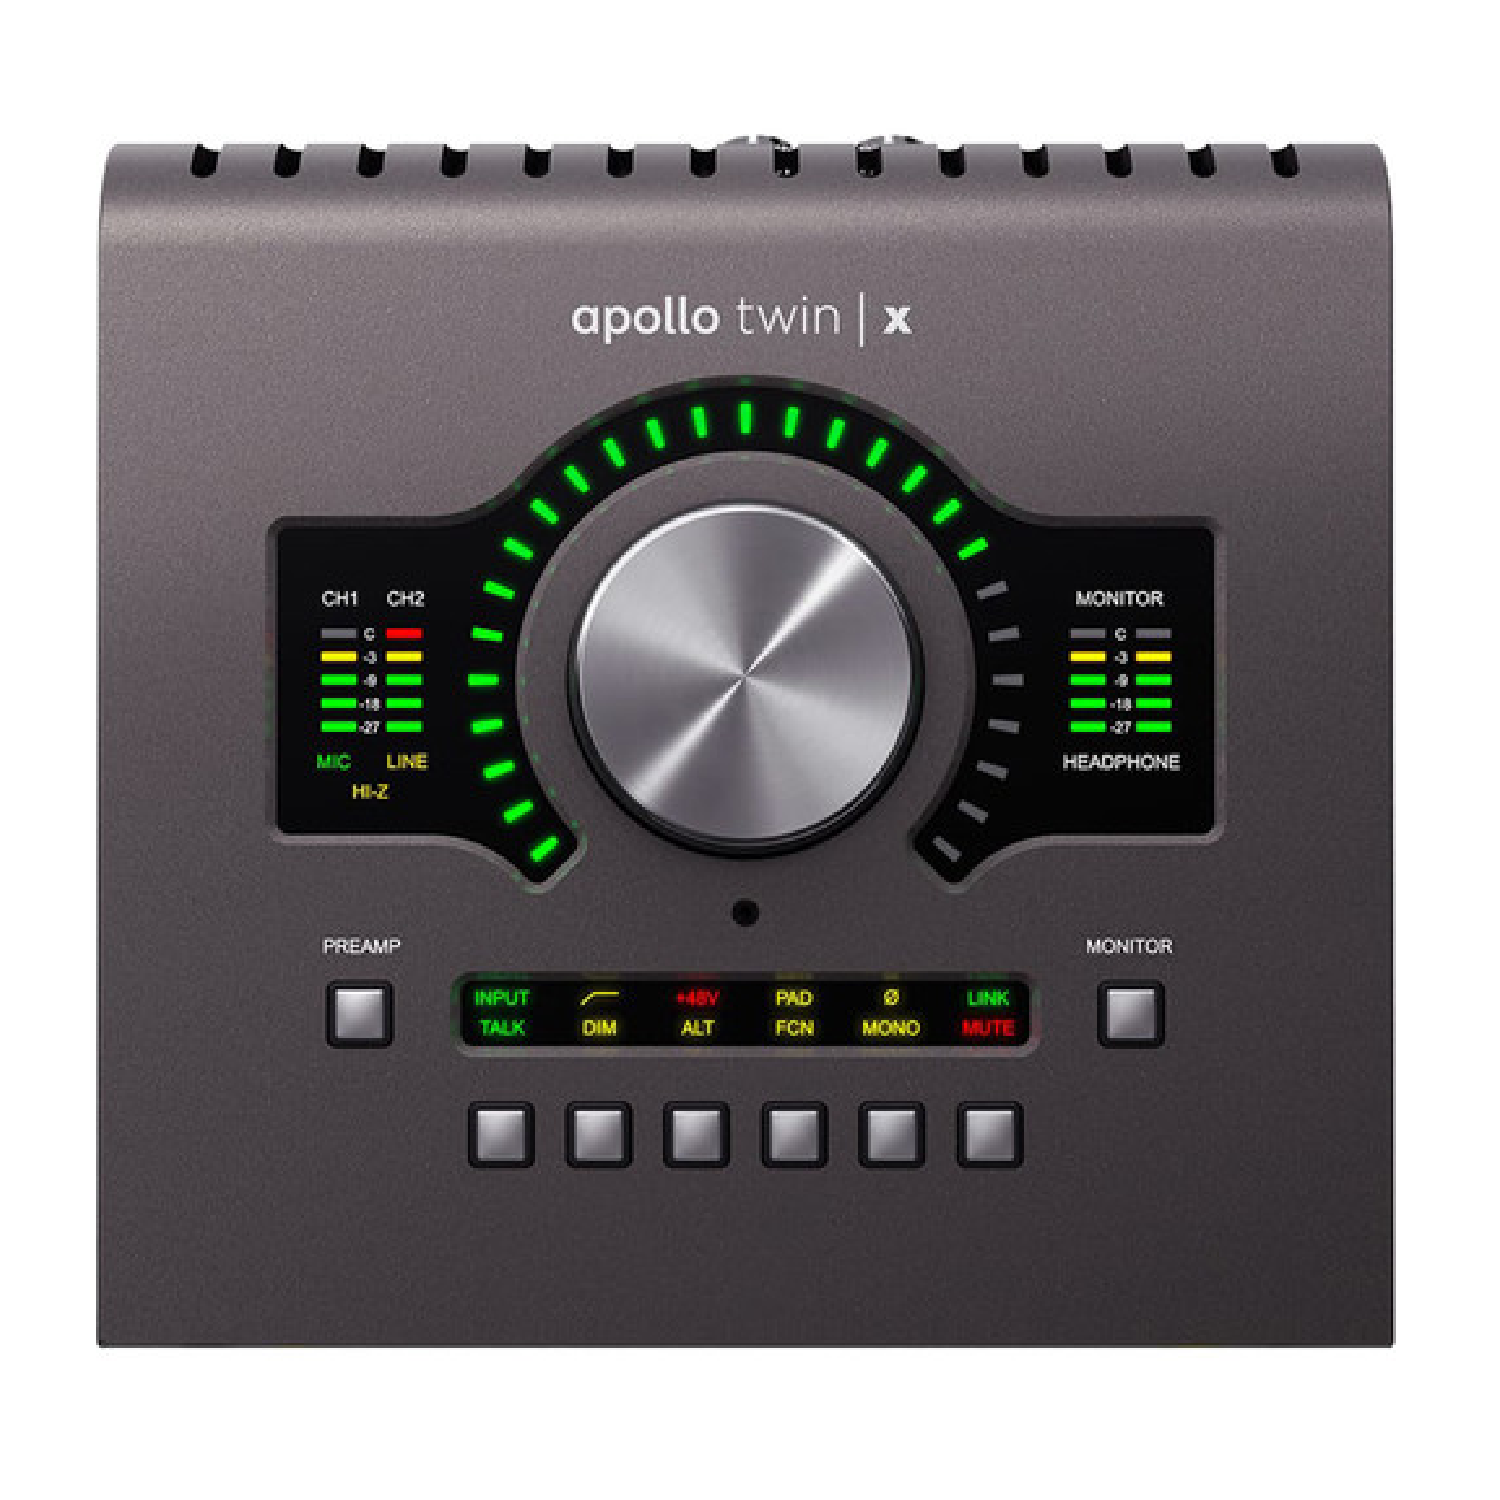 QUAD Thunderbolt 3 Desktop Audio Interface with Real-Time UAD Processing   Apollo Twin X w/ QUAD Processing universal audio